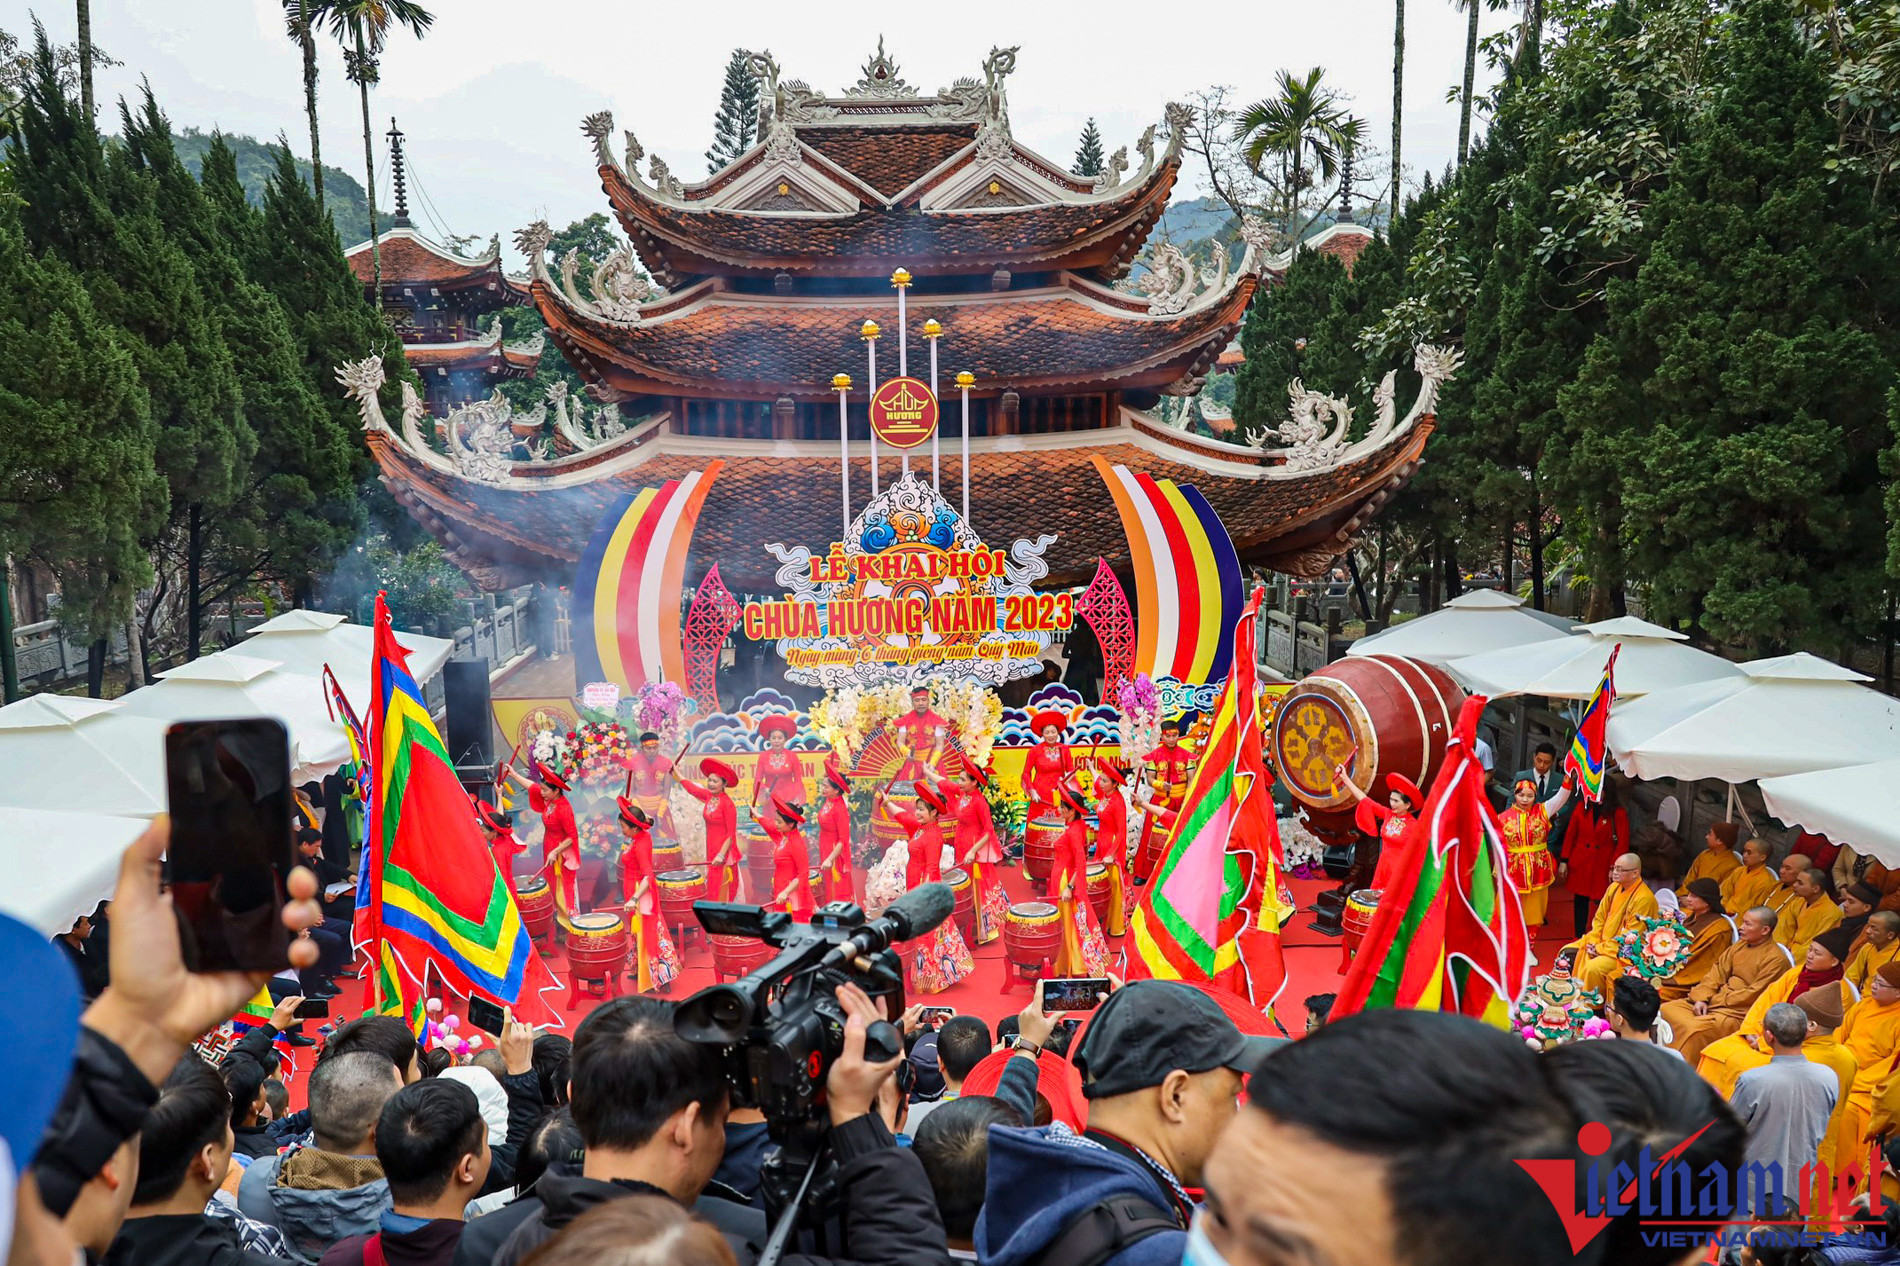 Huong Pagoda crowded on the first day of spring festival 2023